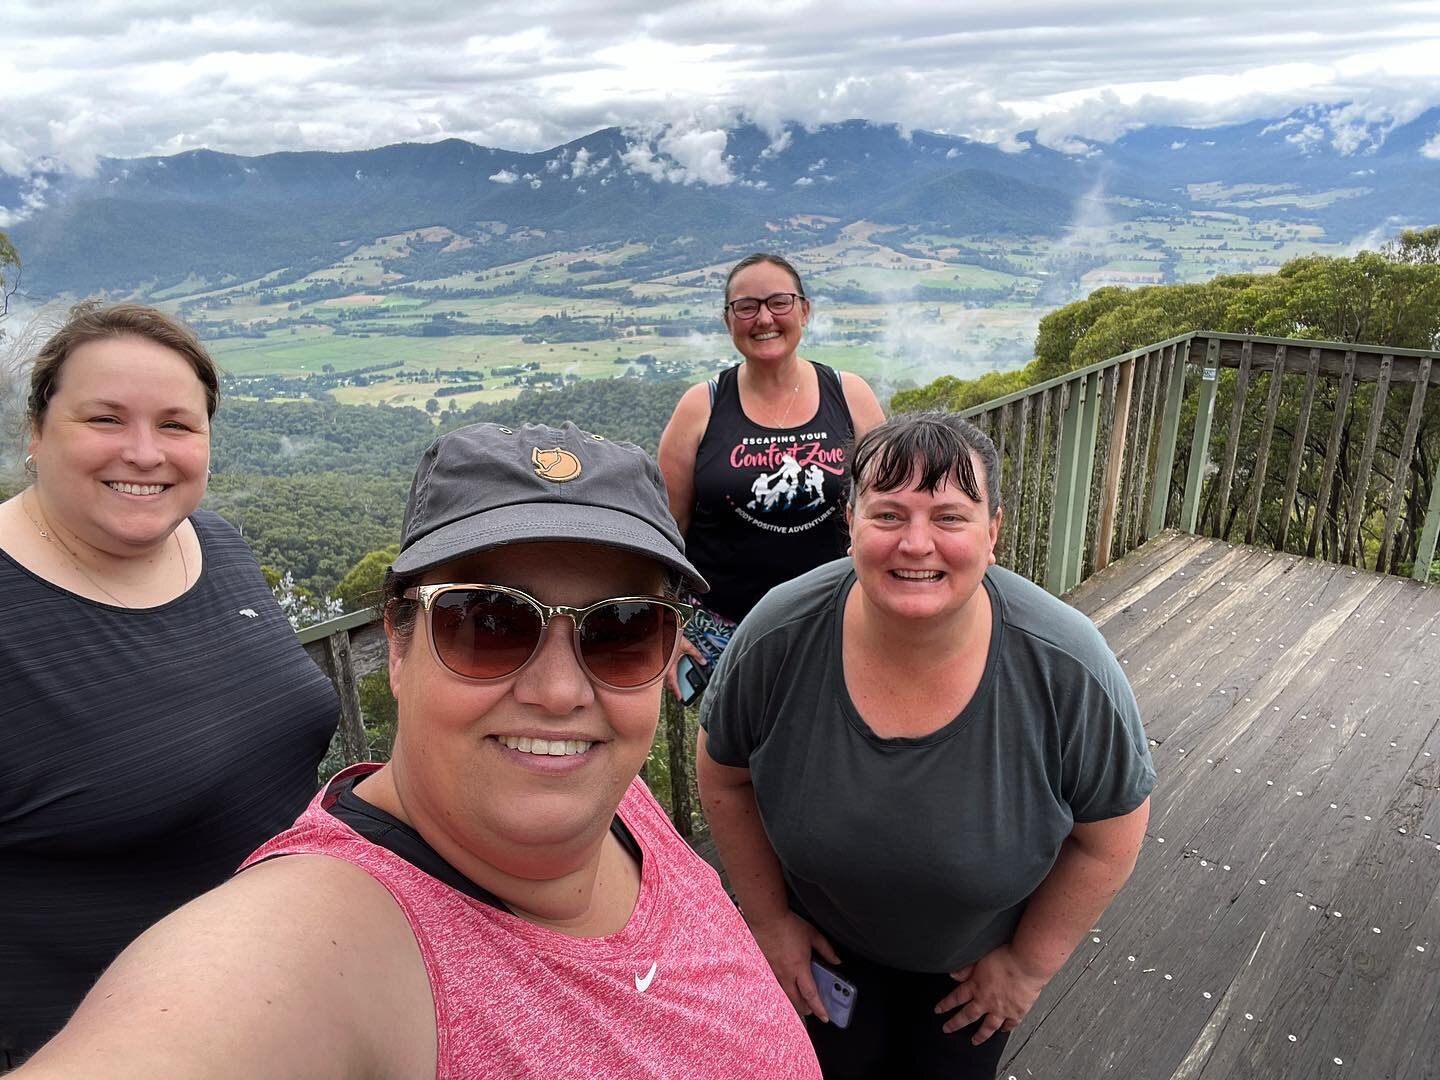 The views are cloudy but spectacular all the same. A little side trip to Mt Beauty as part of the Bright &lsquo;Choose your own Adventure&rsquo; trip. It&rsquo;s been a mixed bag of weather but having a fabulous time regardless. #escapingyourcomfortz